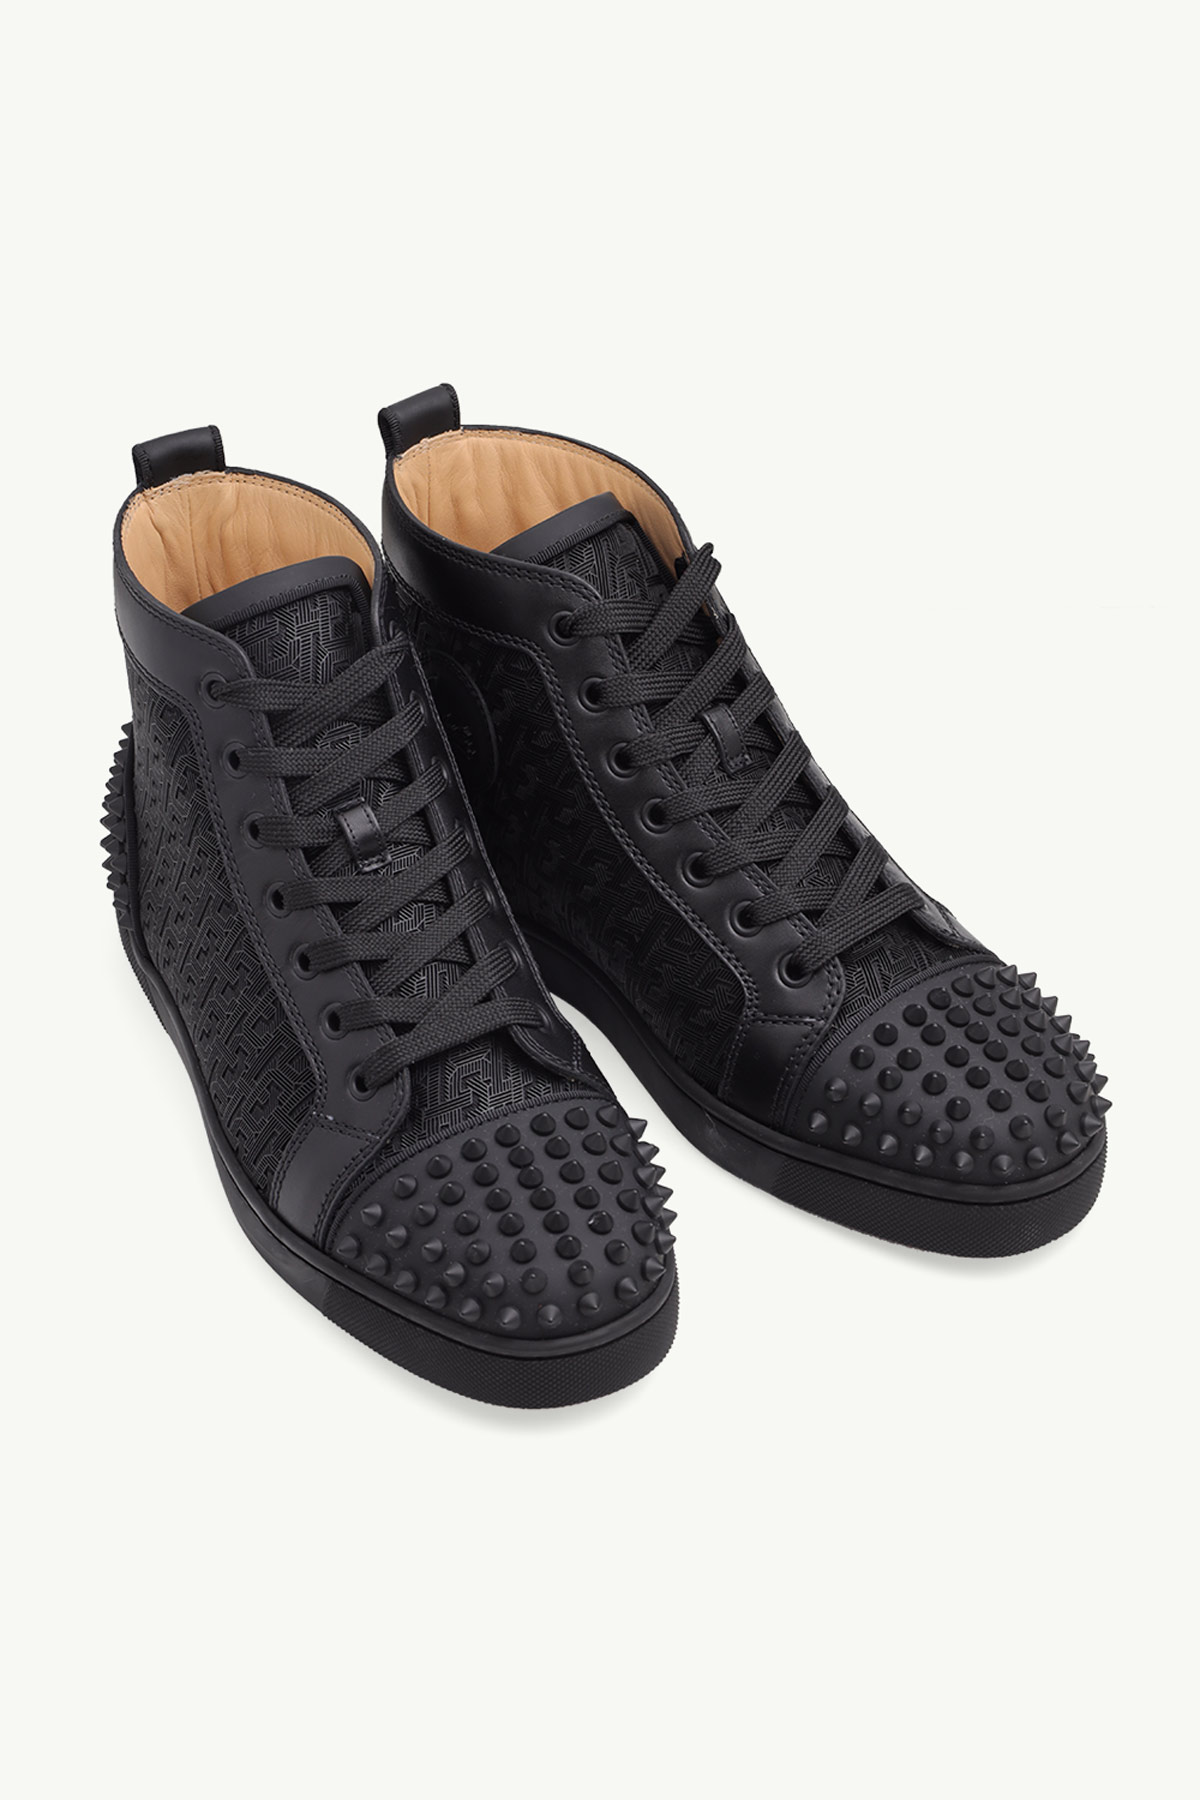 CHRISTIAN LOUBOUTIN Men Lou Spikes 2 High Top Sneakers in All Black Rubber 1